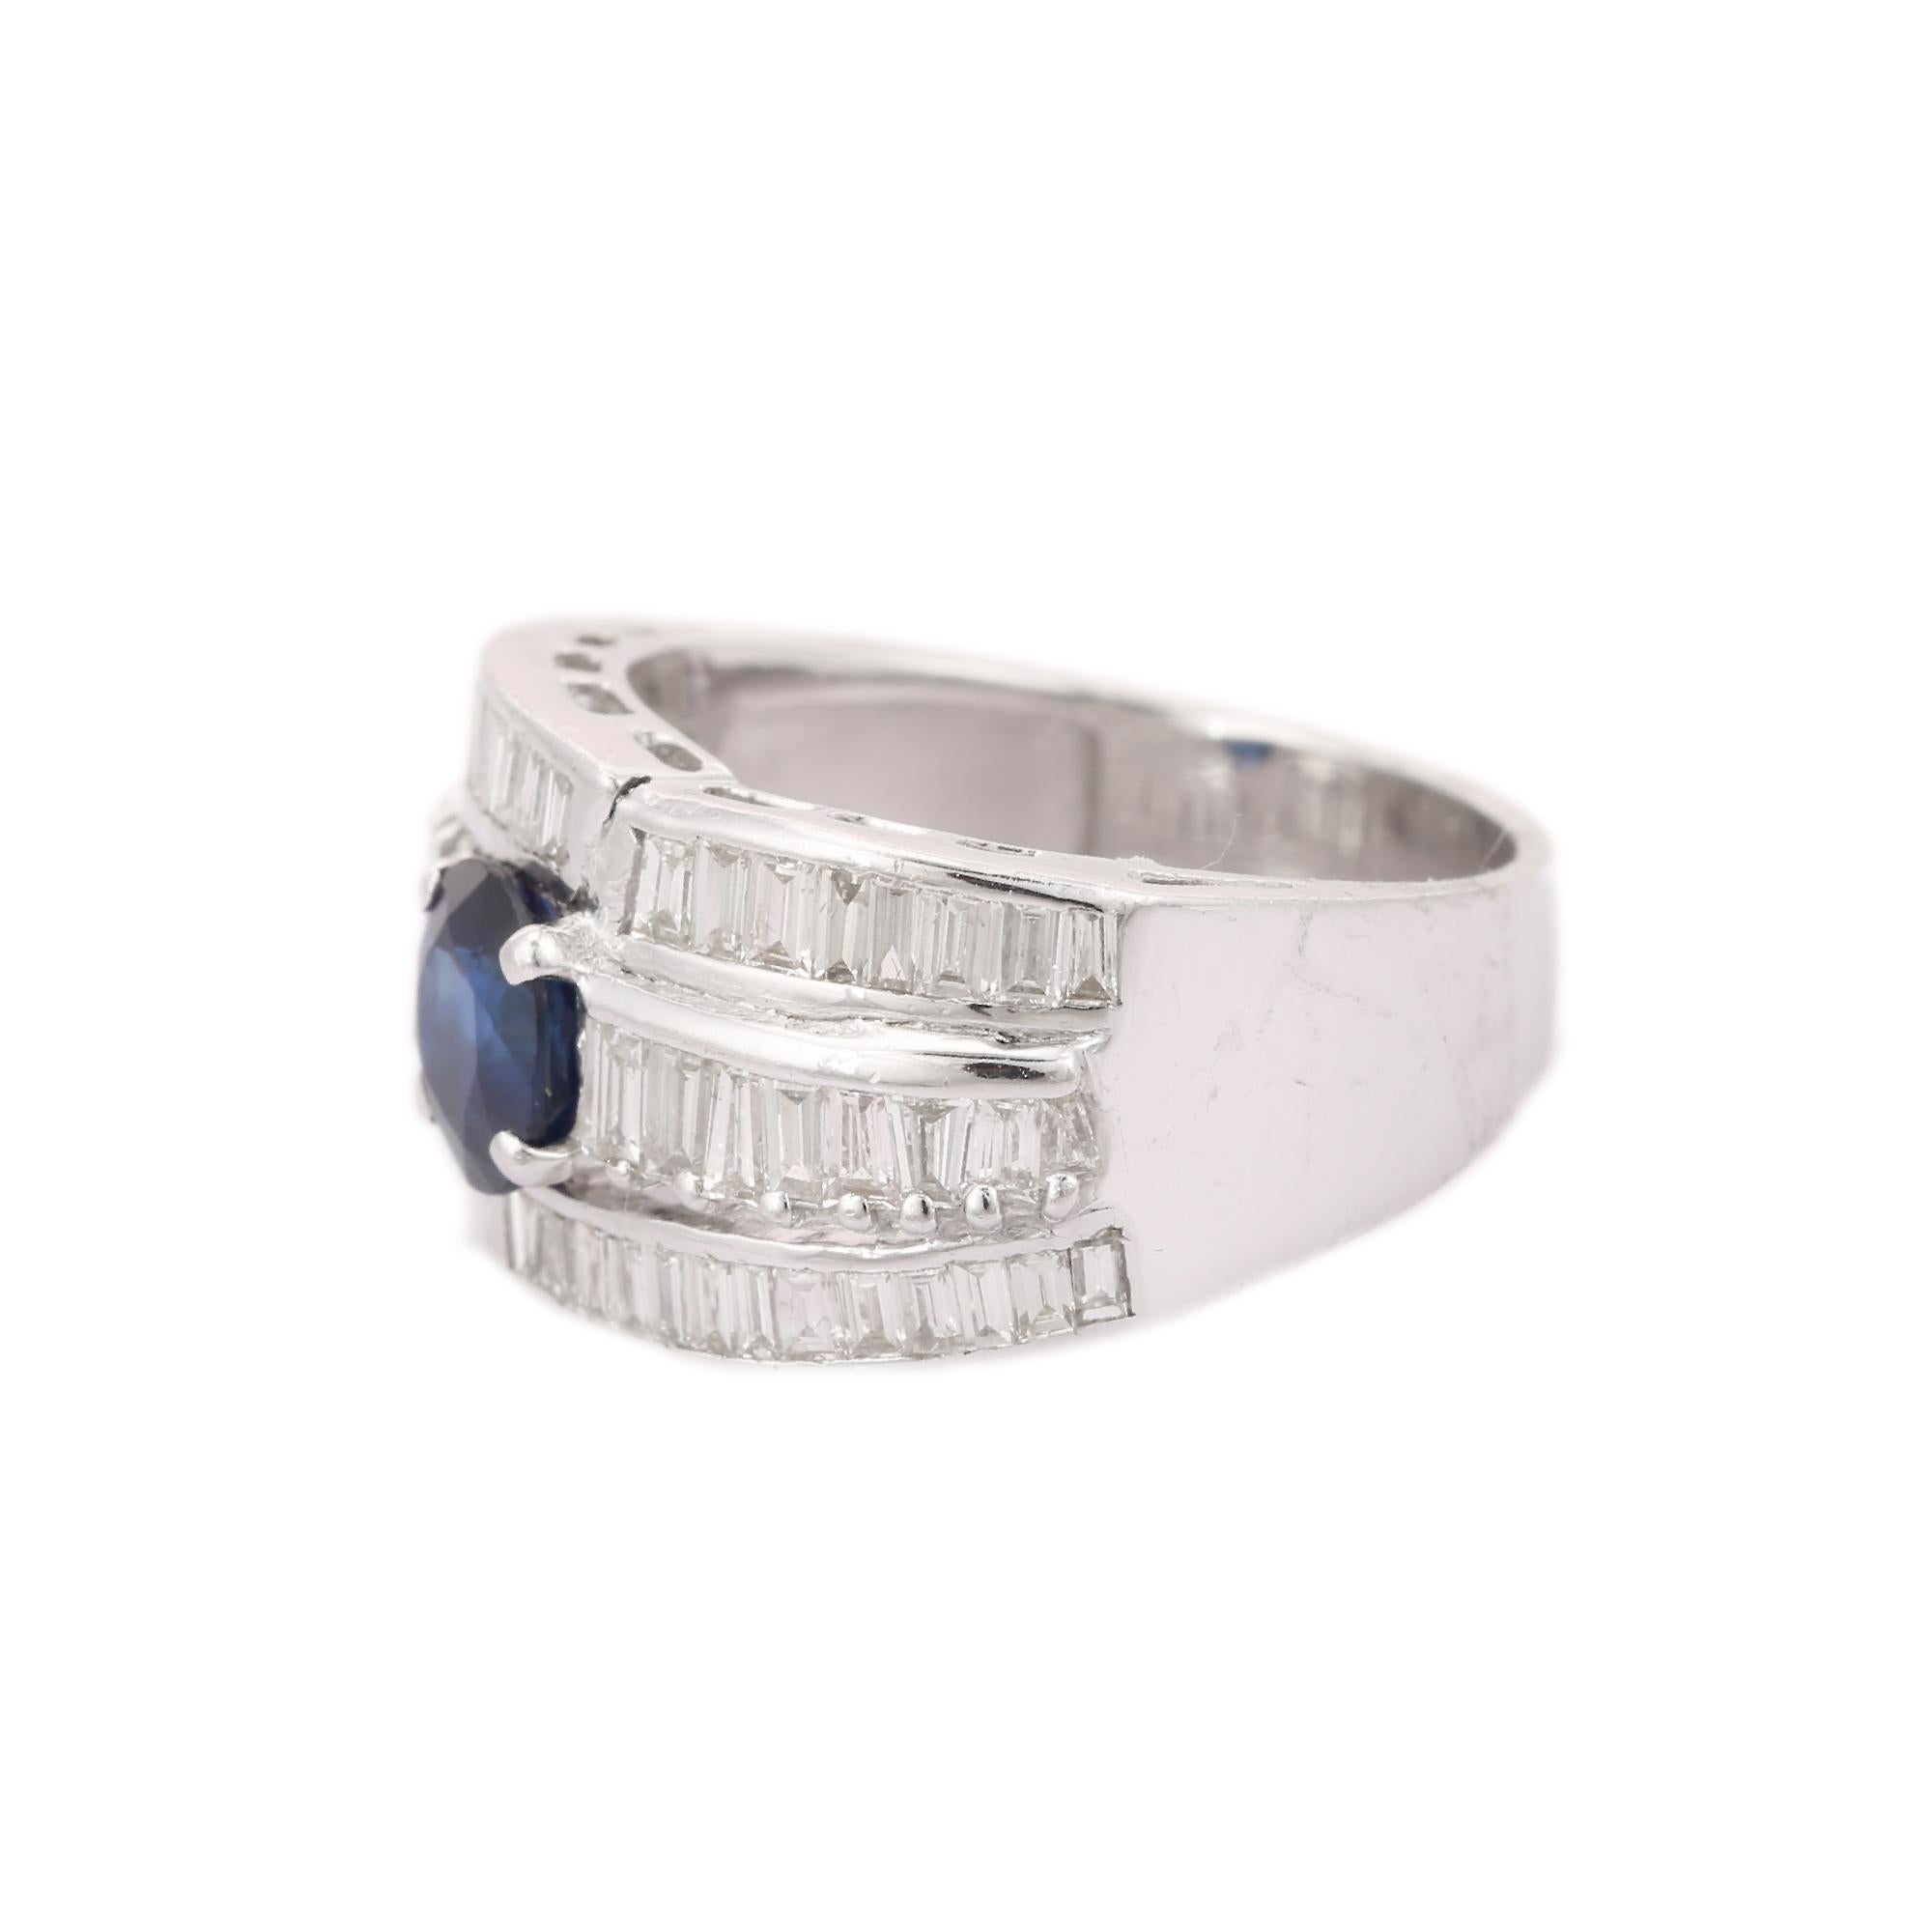 For Sale:  Blue Sapphire Diamond Thick Engagement Band Style Ring in 18kt Solid White Gold 4